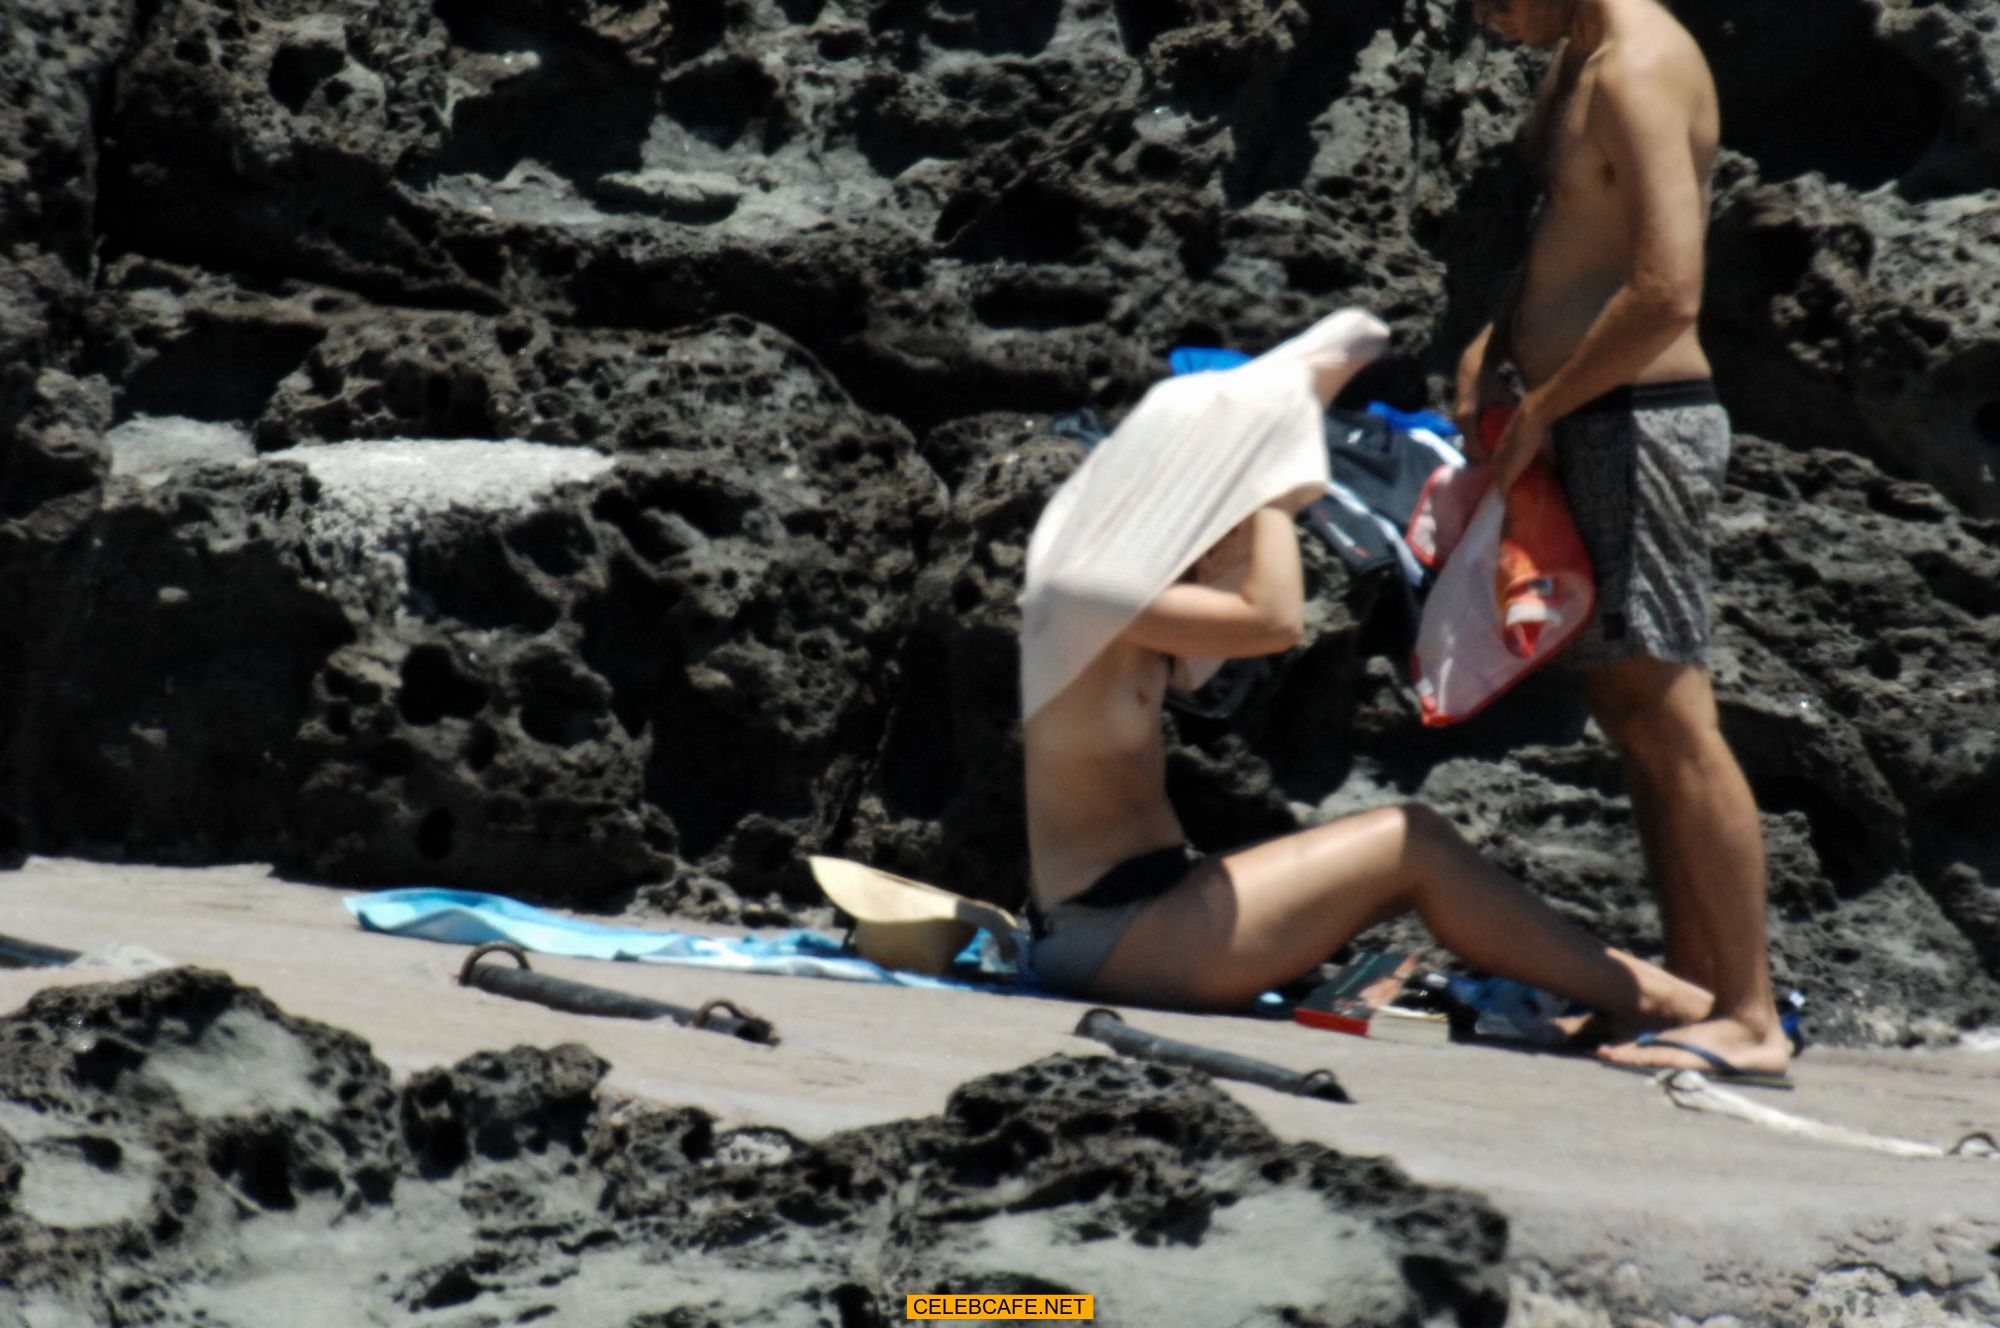 keira_knightley_on_the_beach_in_pantelleria_some_topless_62918_16.jpg